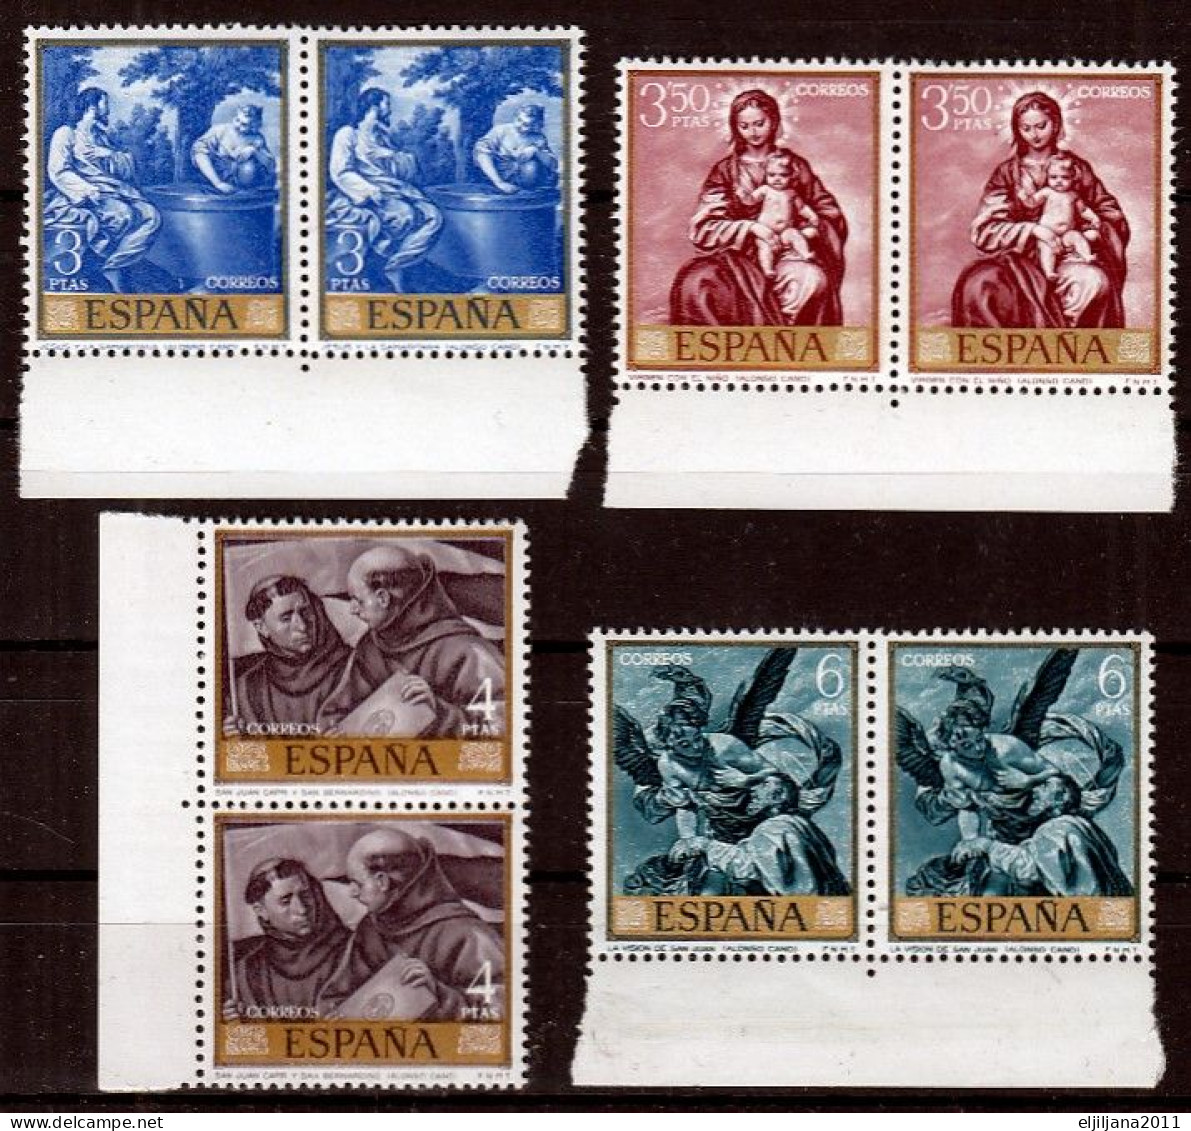 ⁕ SPAIN / ESPANA 1969 ⁕ Alonso Cano (stamp Day) Art Painting Gemalde Mi.1796-1805 X2 ⁕ MNH - Unused Stamps